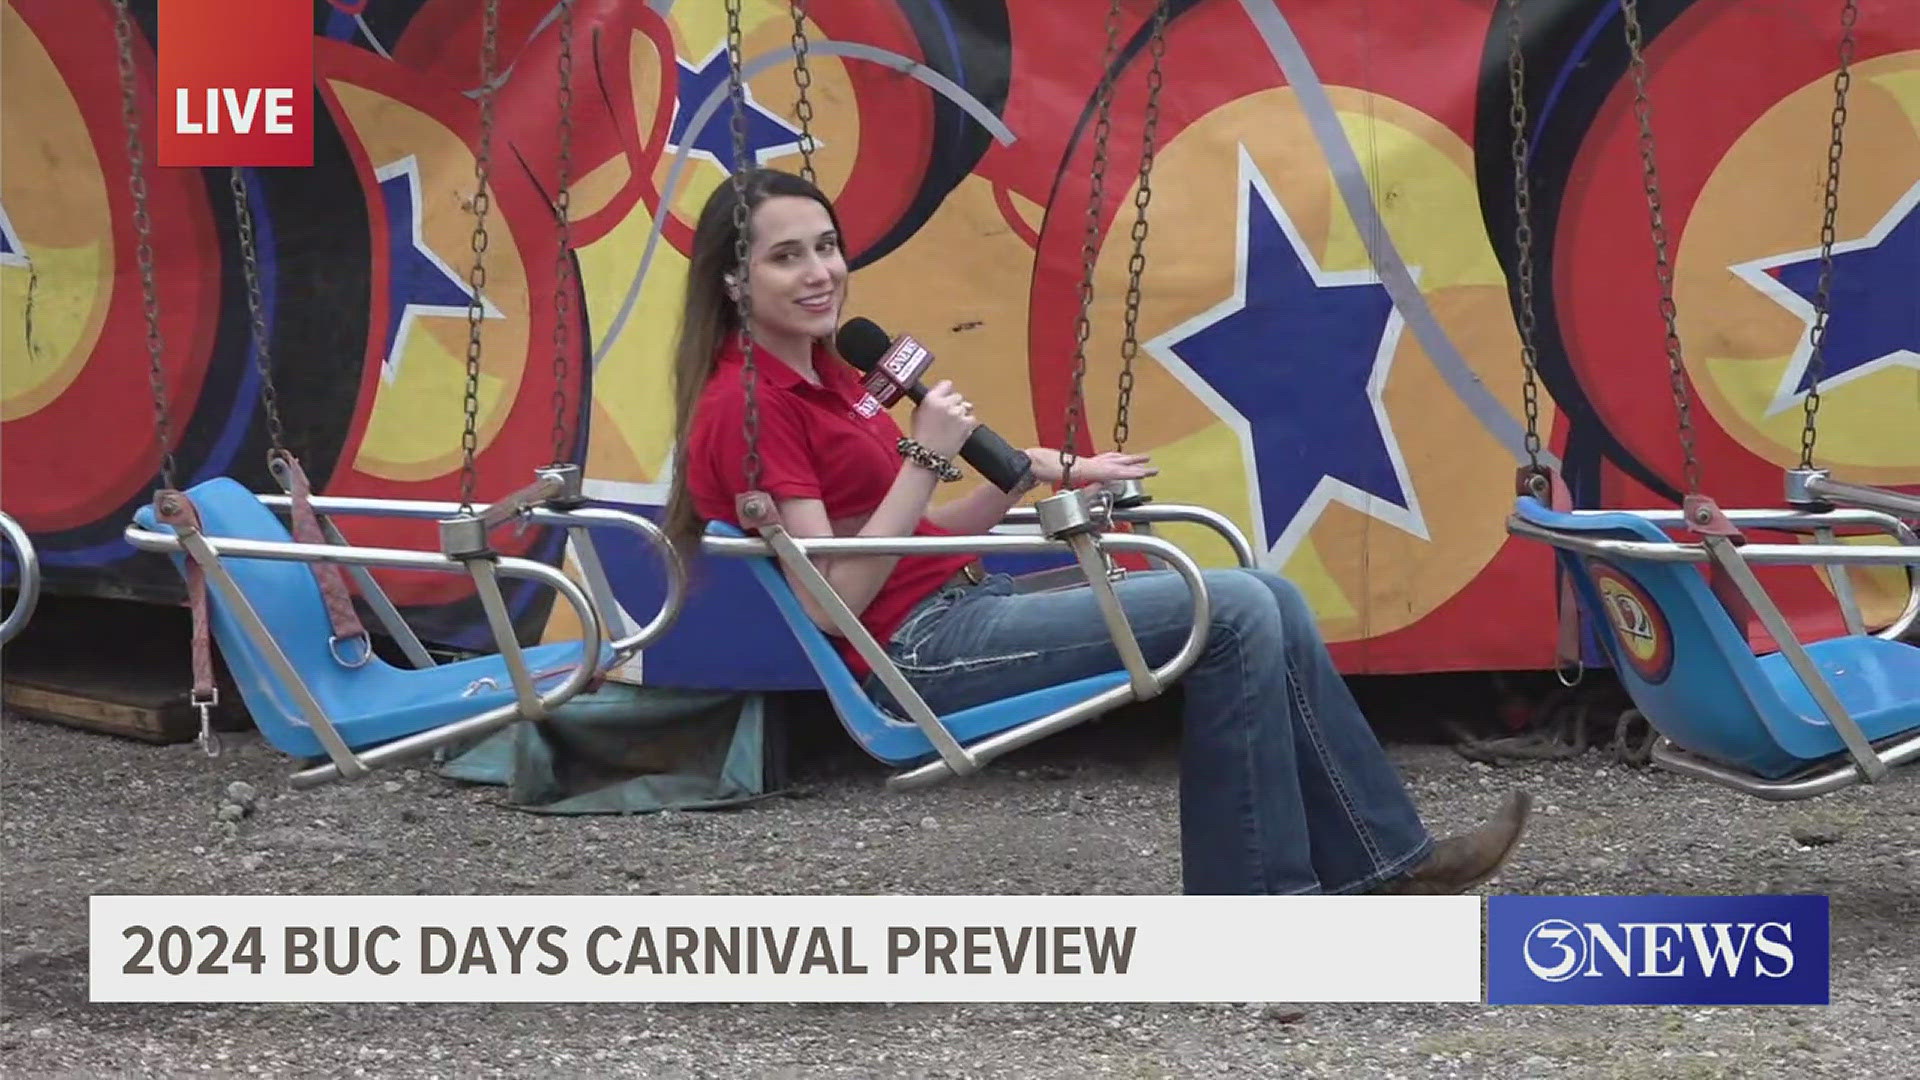 If you were in awe of how Kristin could speak while spinning and didn't catch what she said: get your tickets because there is a lot to do and see at Buc Days!